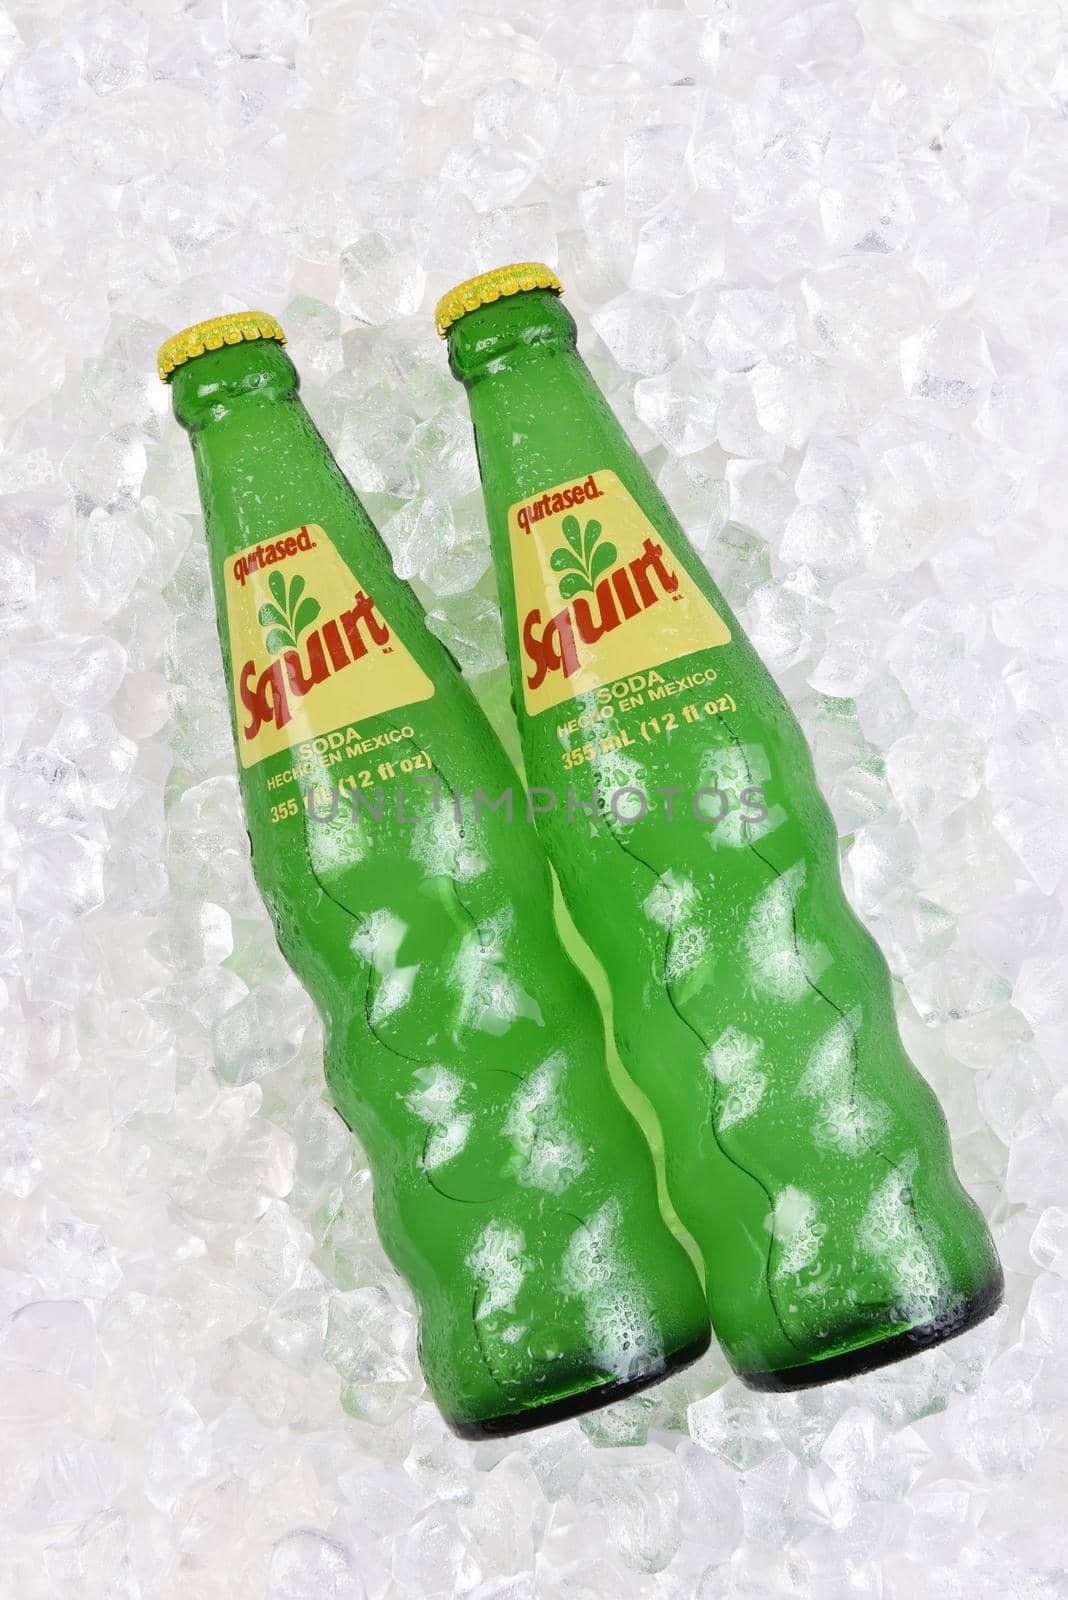 IRVINE, CALIFORNIA - 20 APRIL 2020: Two Bottles of Squirt Citrus Flavored Soft Drink in a bed of ice. Bottled in Mexico.  by sCukrov